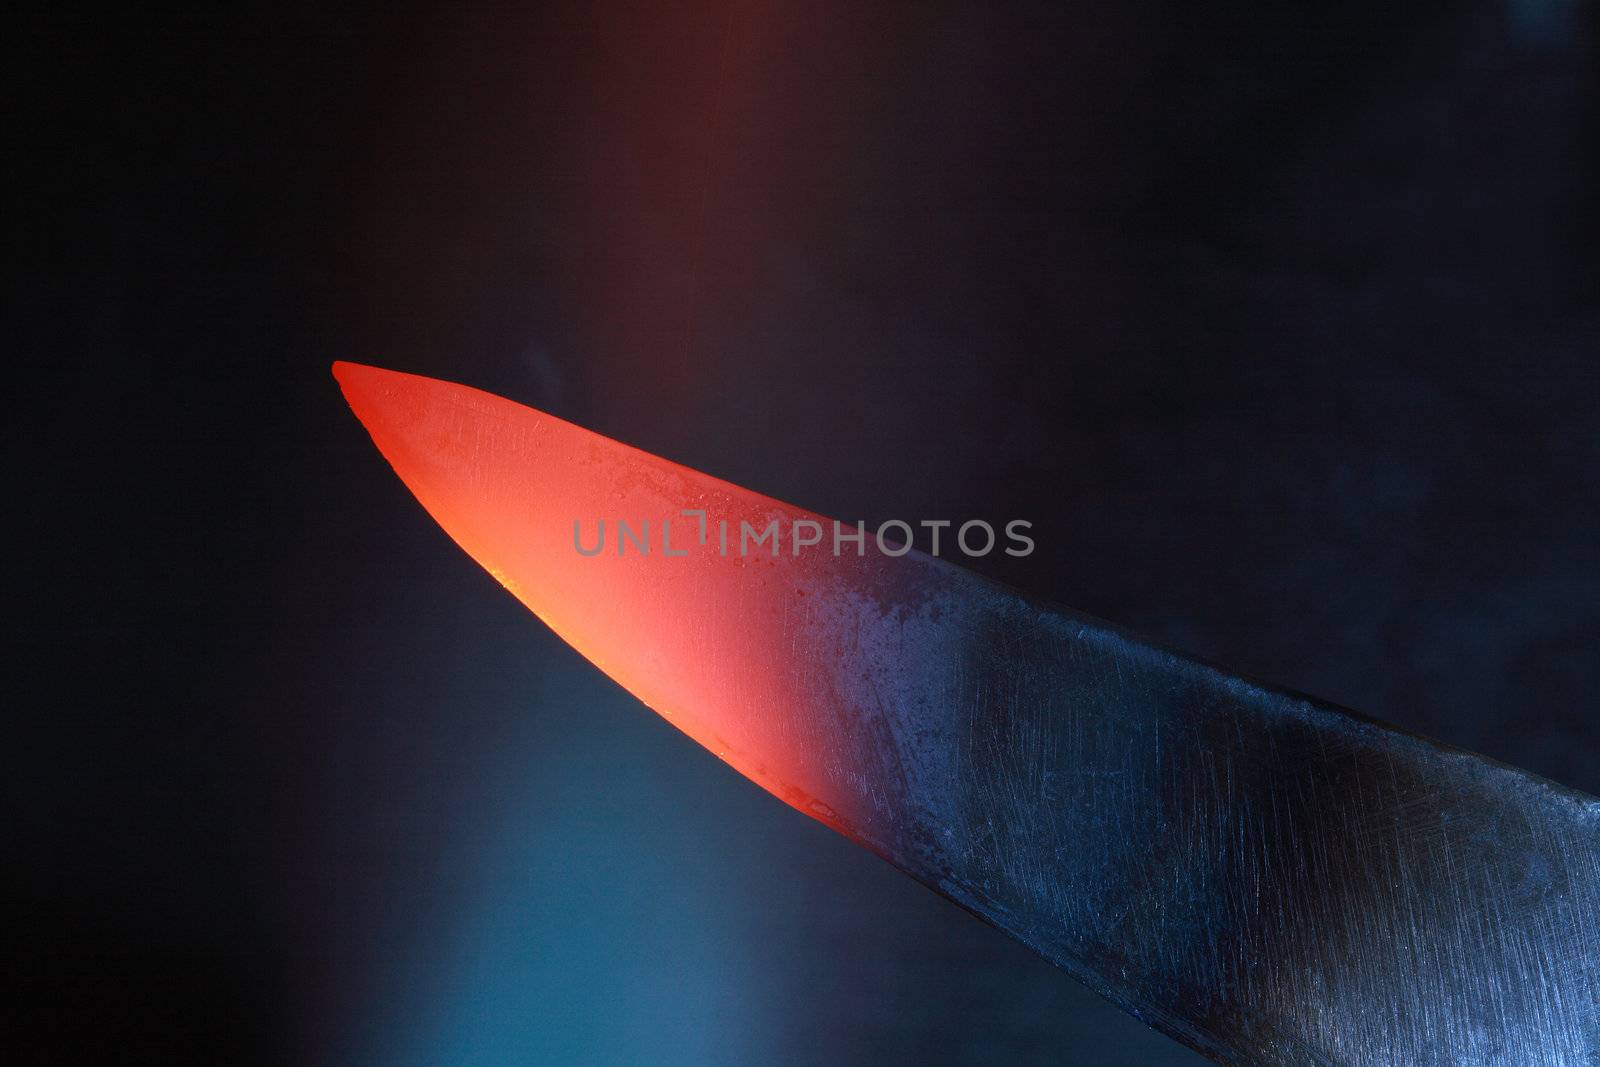 Abstract dark background with closeup of red-hot knife in flame